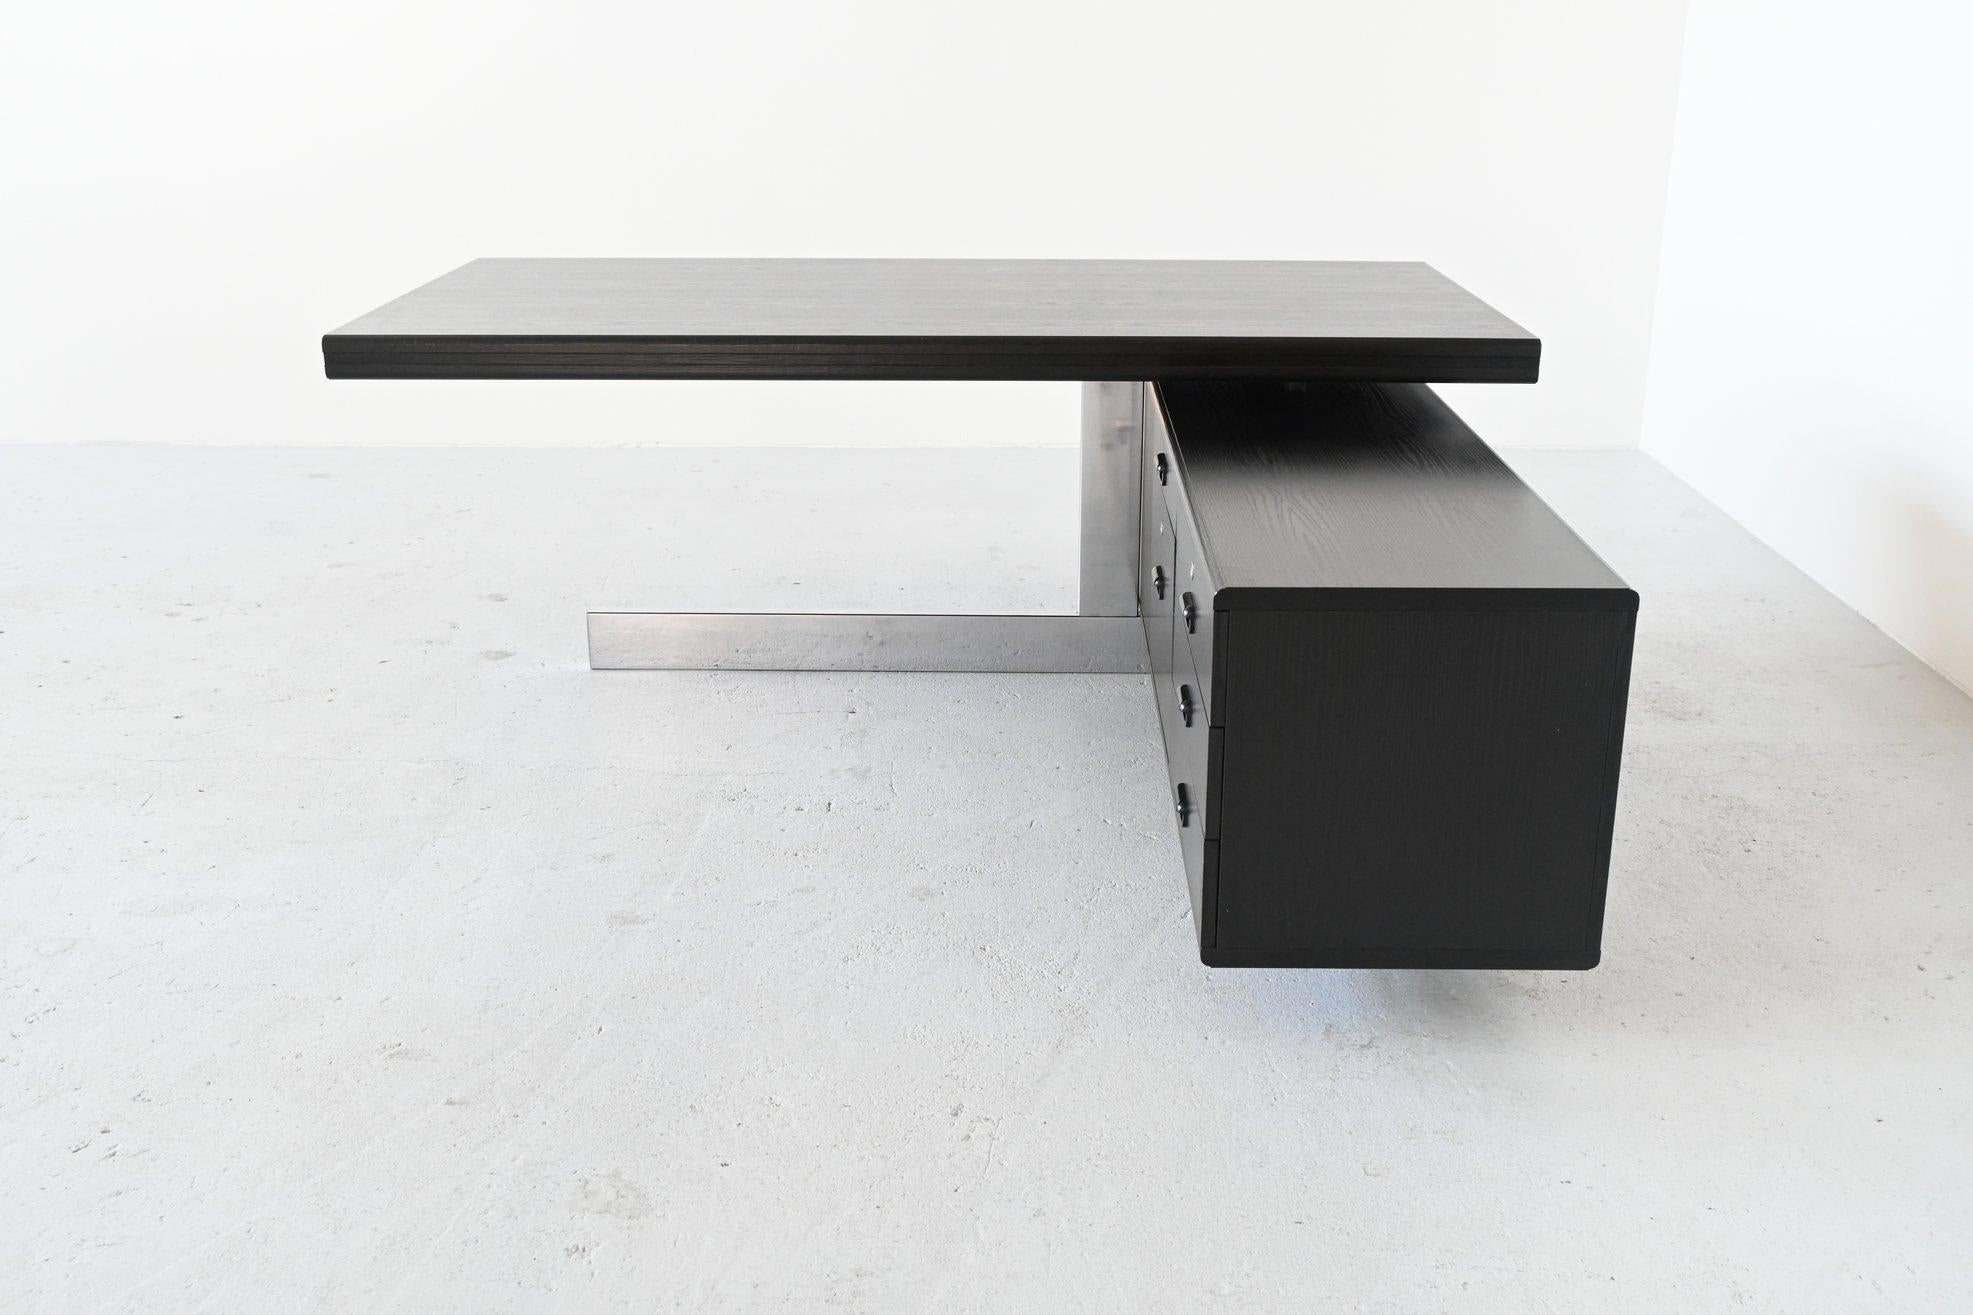 Stunning large executive desk by unknown designer or manufacturer, Italy, 1970. This very nice shaped desk has a great and innovative appearance. The top seems to float due to the strong and smart construction of the base. It is made of black